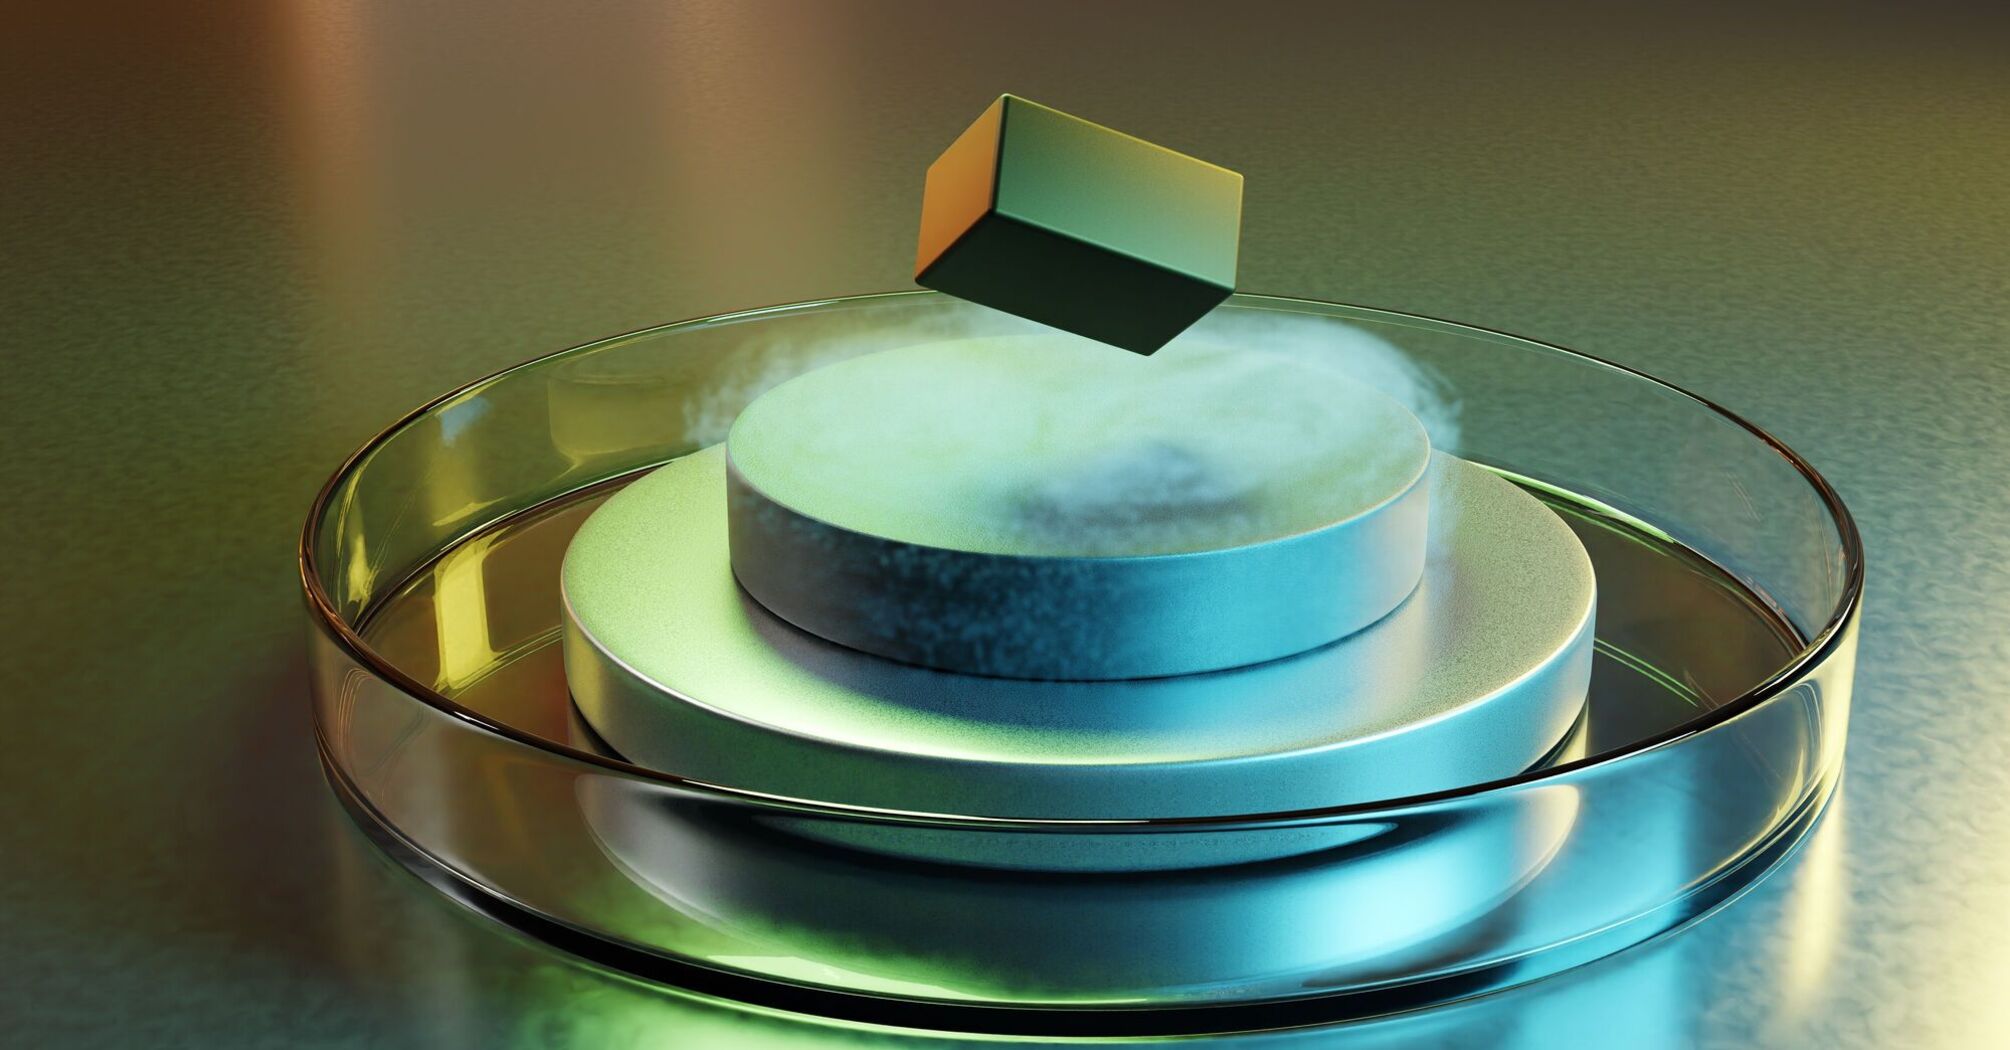 A new form of superconductivity discovered: what it means at the household level